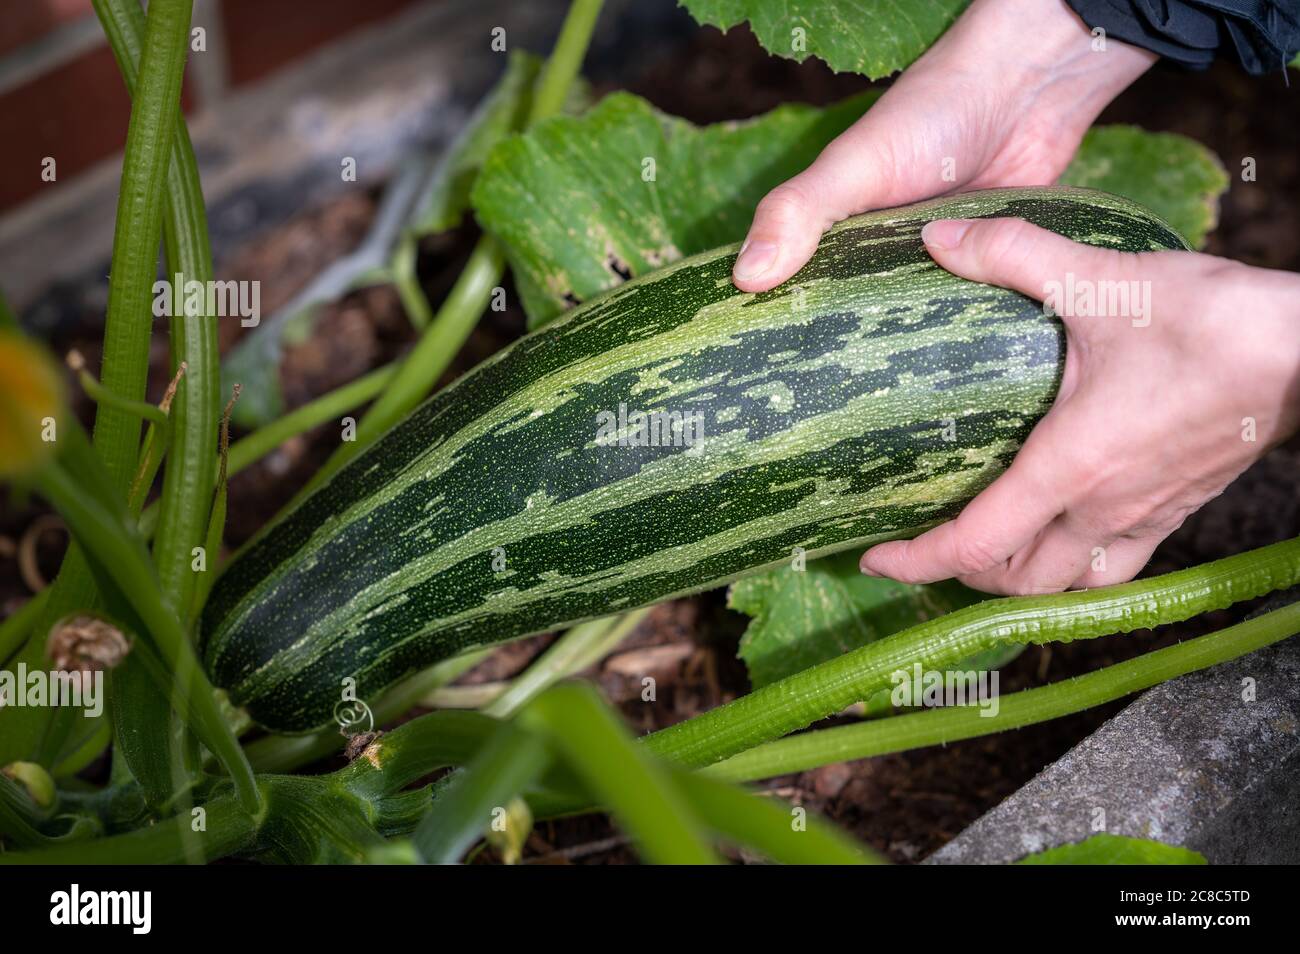 A gardener is harvesting a Zucchini in the own garden. Stock Photo